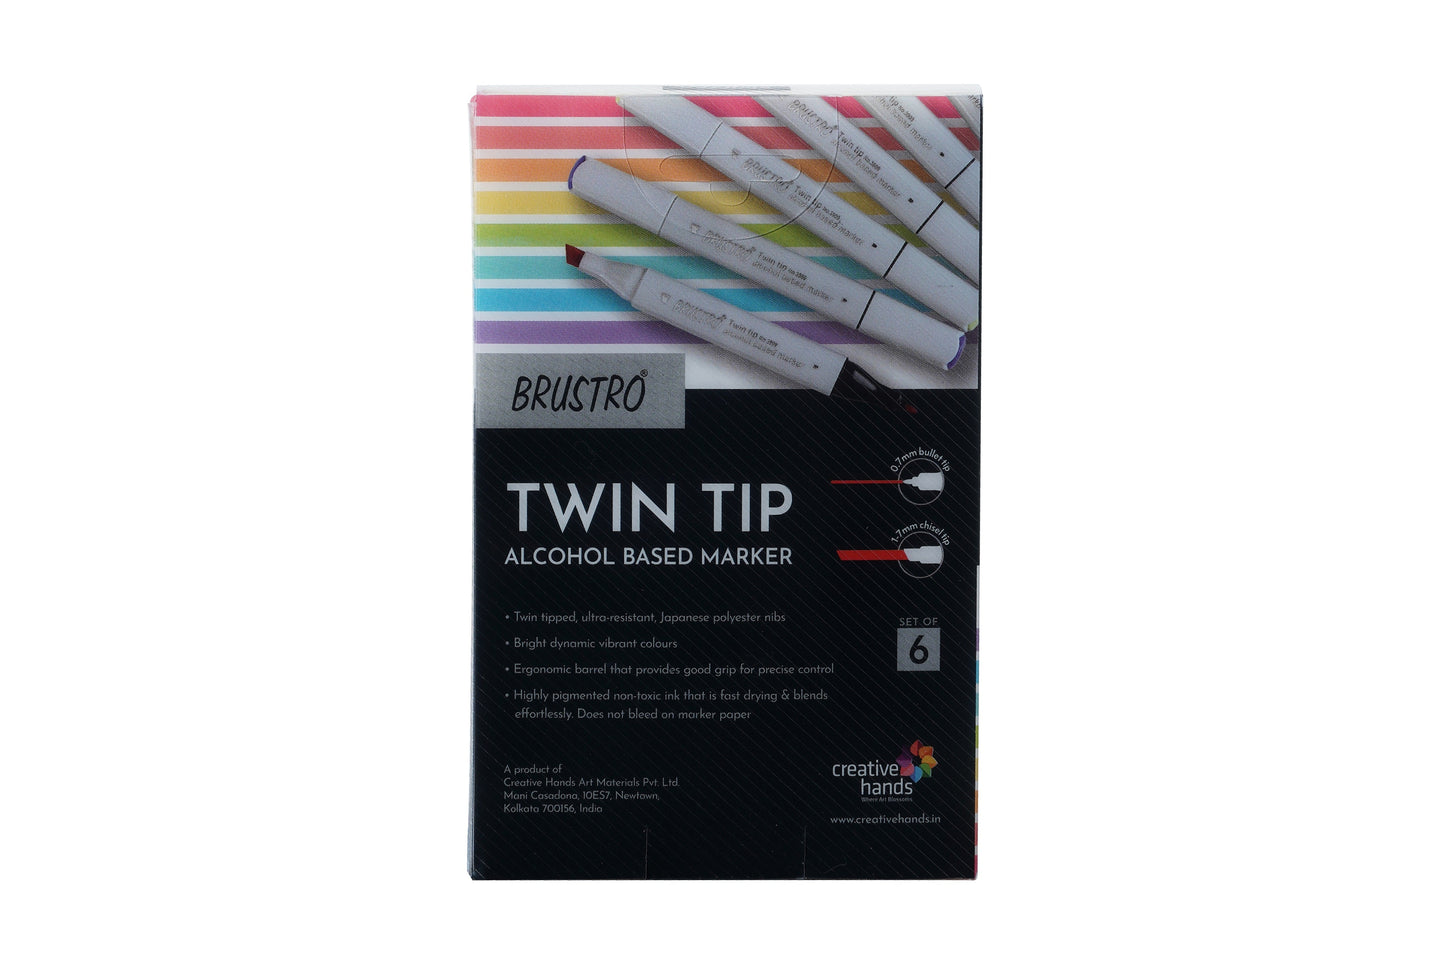 BRUSTRO Twin Tip Alcohol Based Marker Set of 6 (Yellows)